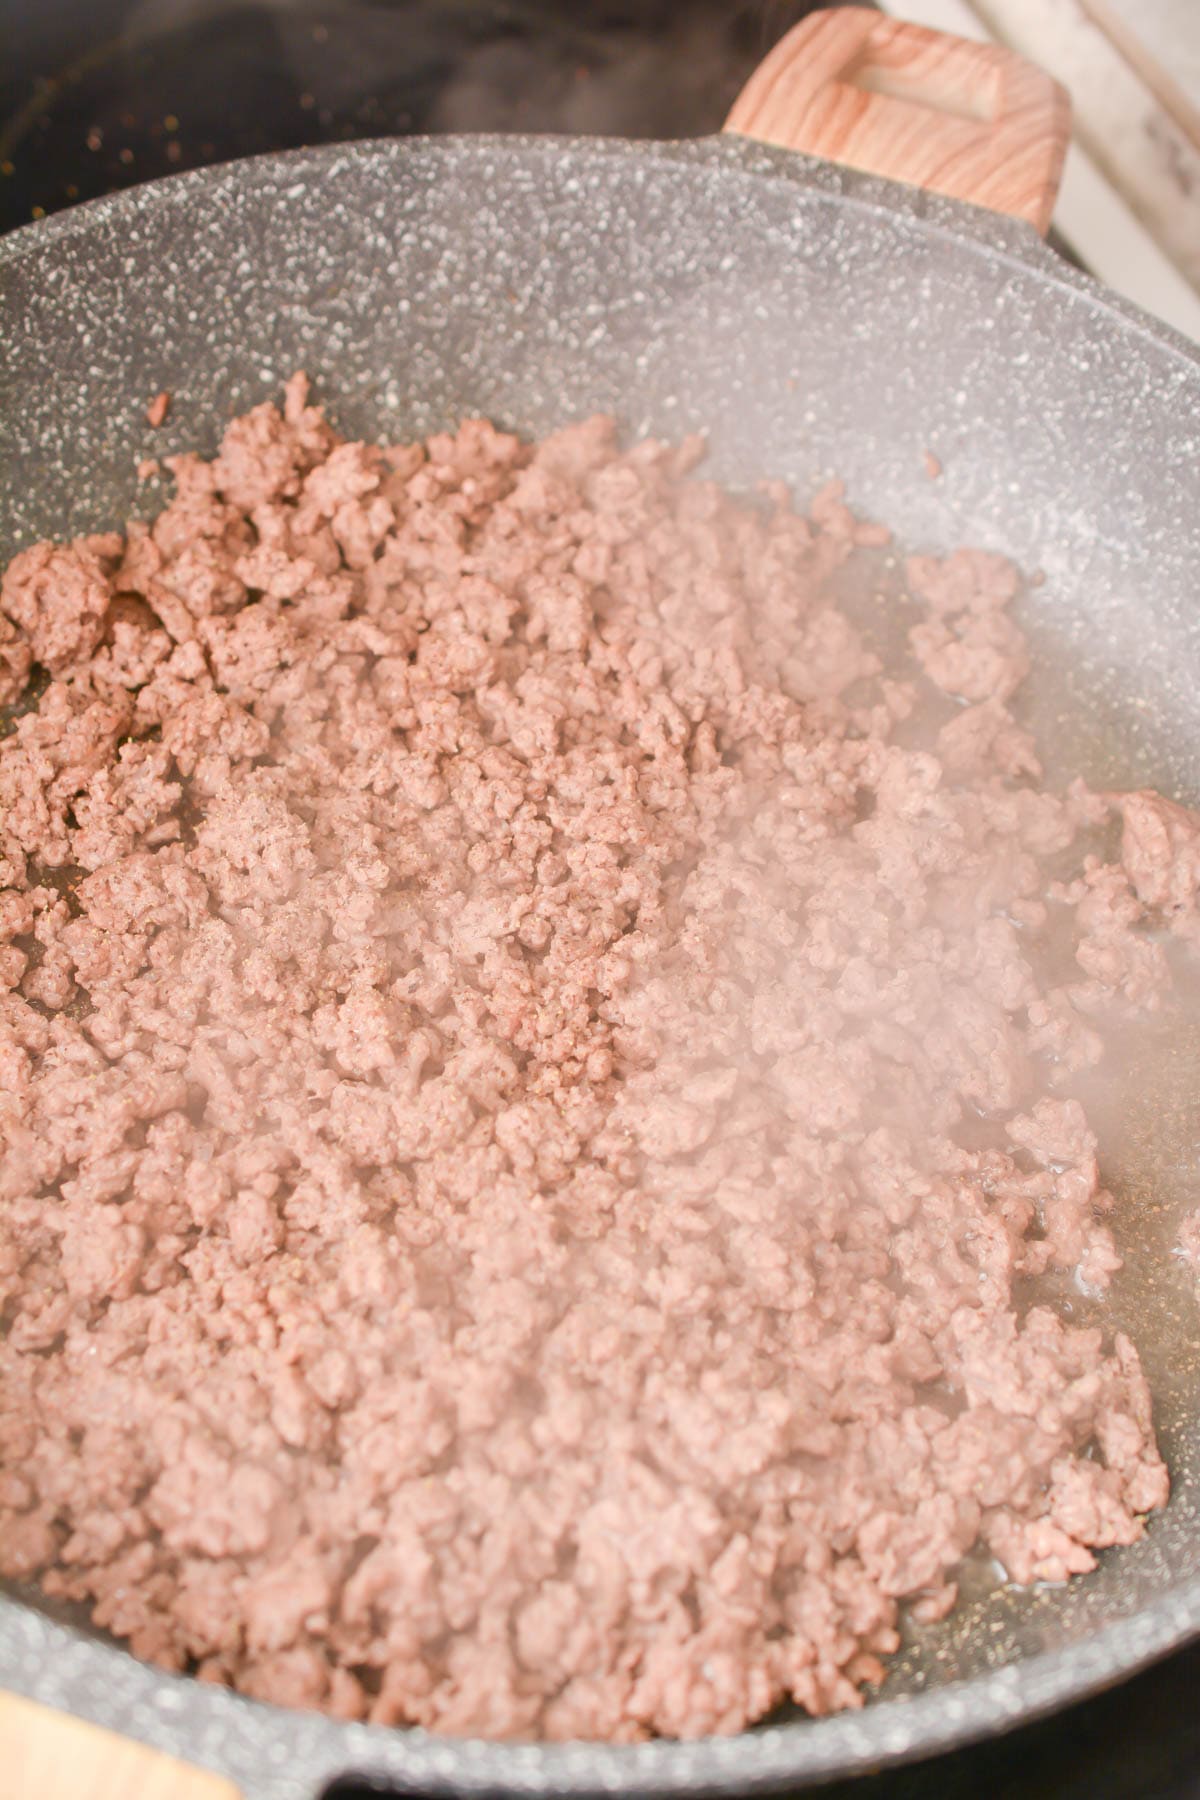 Brown the ground beef in a skillet over medium-high heat on the stove. Drain any excess fat, and reduce the heat to medium-low.